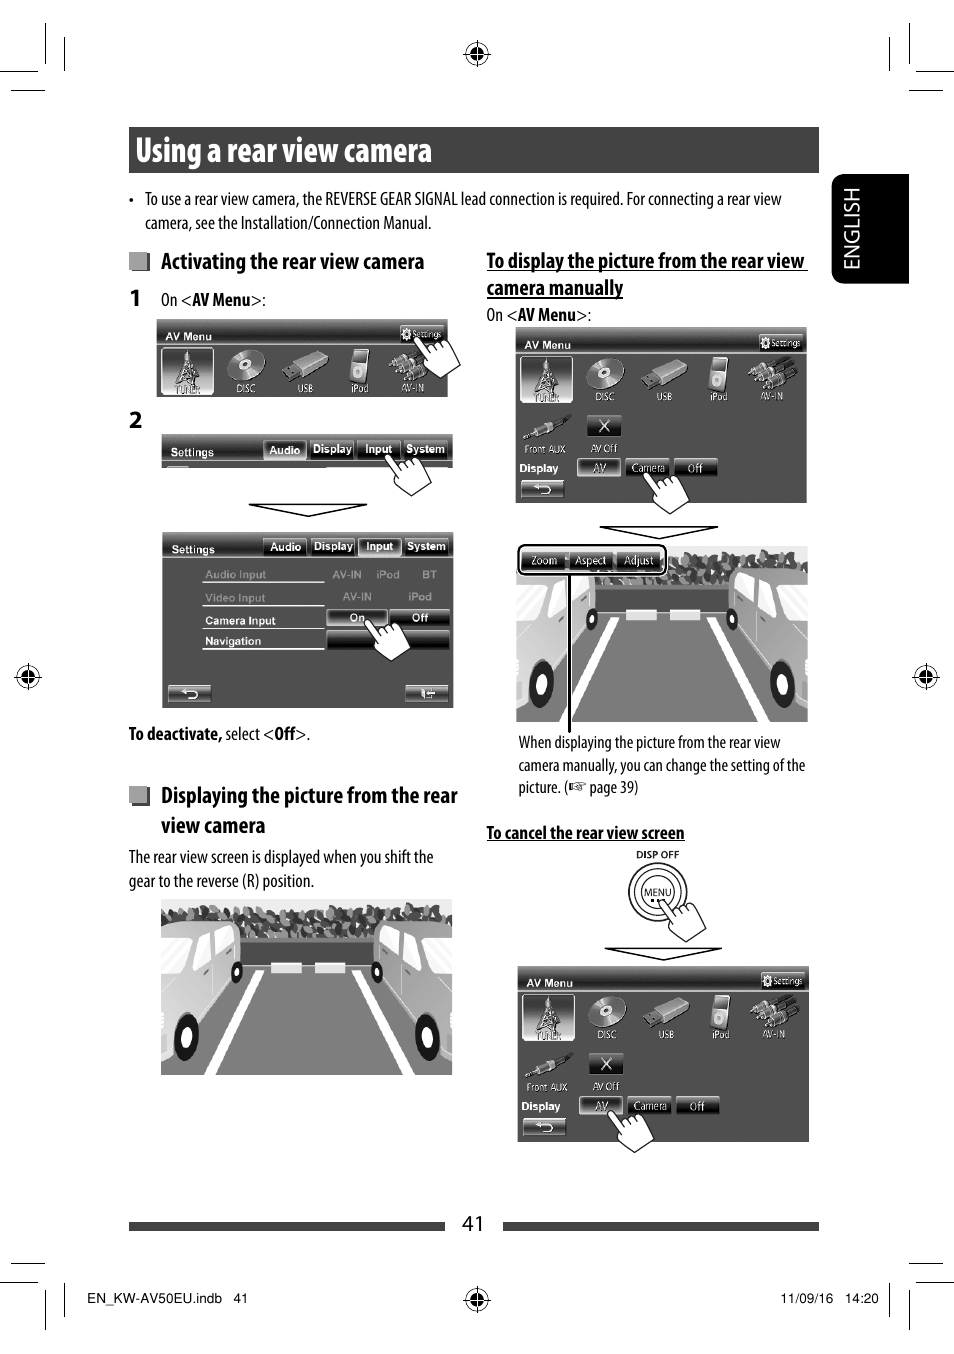 Using a rear view camera, Activating the rear view camera, Displaying the picture from the rear view camera | JVC KW-AV50 User Manual | Page 41 / 183